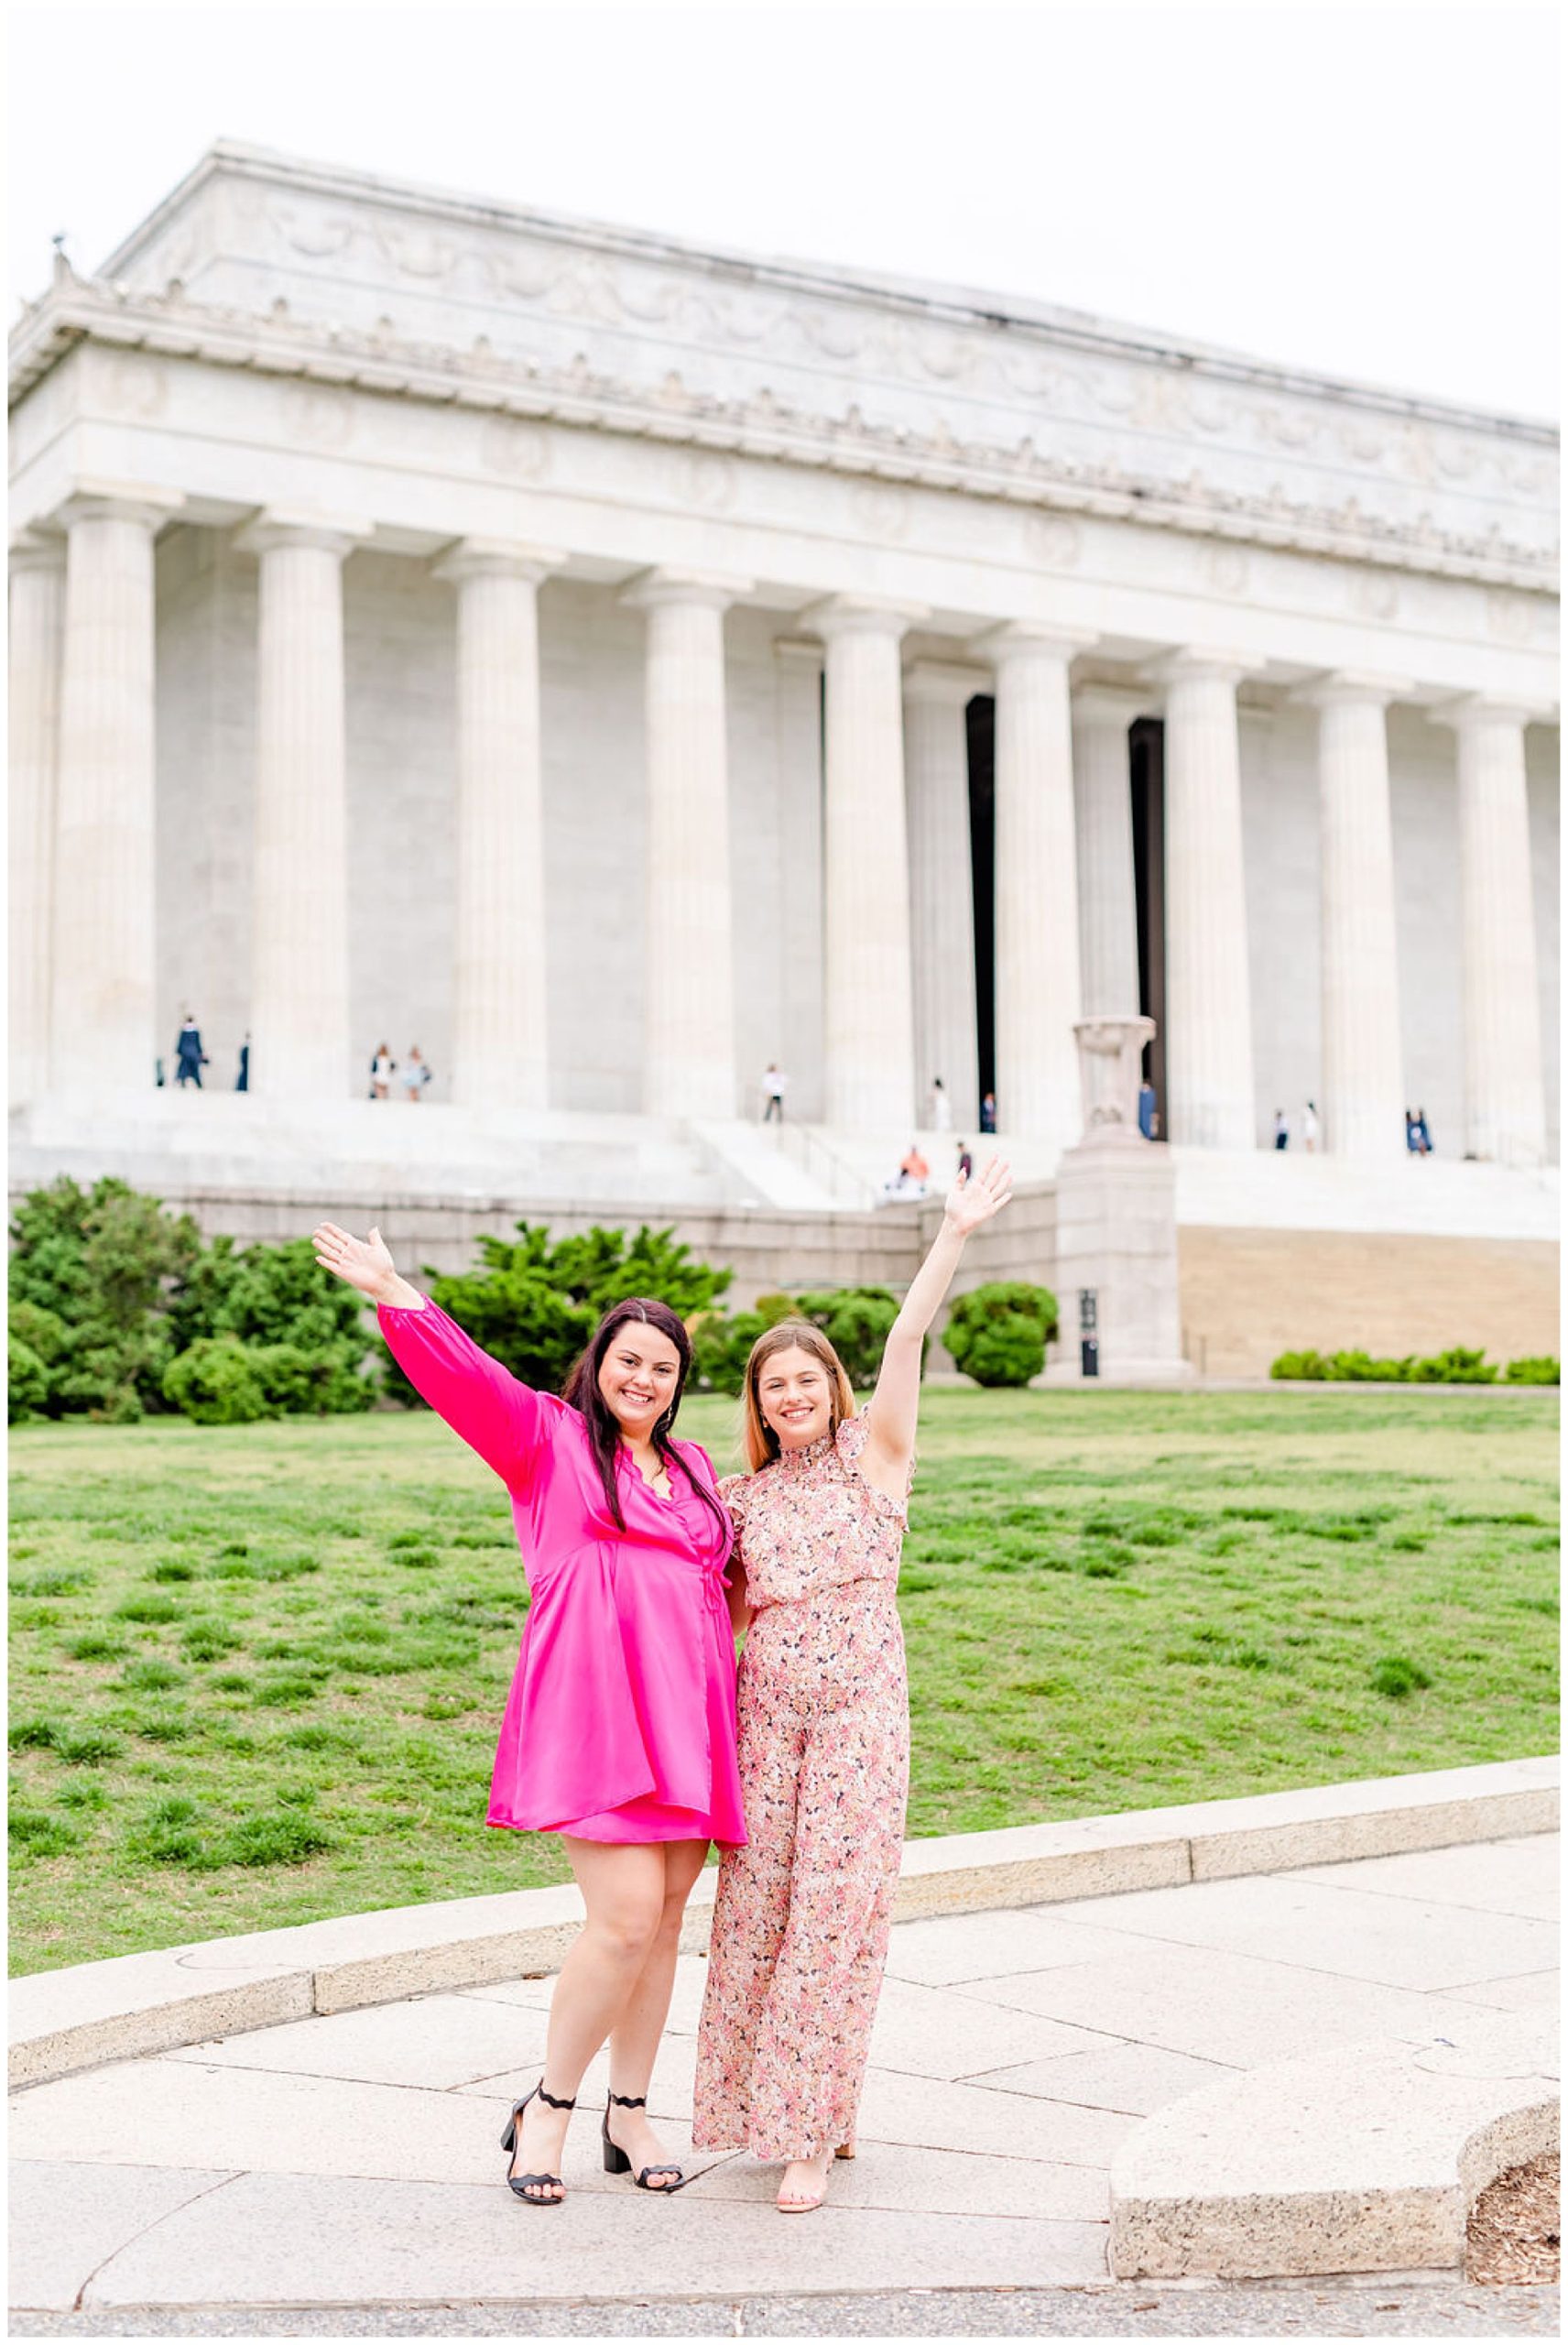 sister graduation photo session, Lincoln Memorial graduation photos, sibling graduation photos, magic hour graduation photos, Washington D.C. graduation photos, D.C graduates, Rachel E.H. Photographer, D.C. graduation photographer, bright pink dress, two sisters, lawn in front of Lincoln memorial, sisters graduating